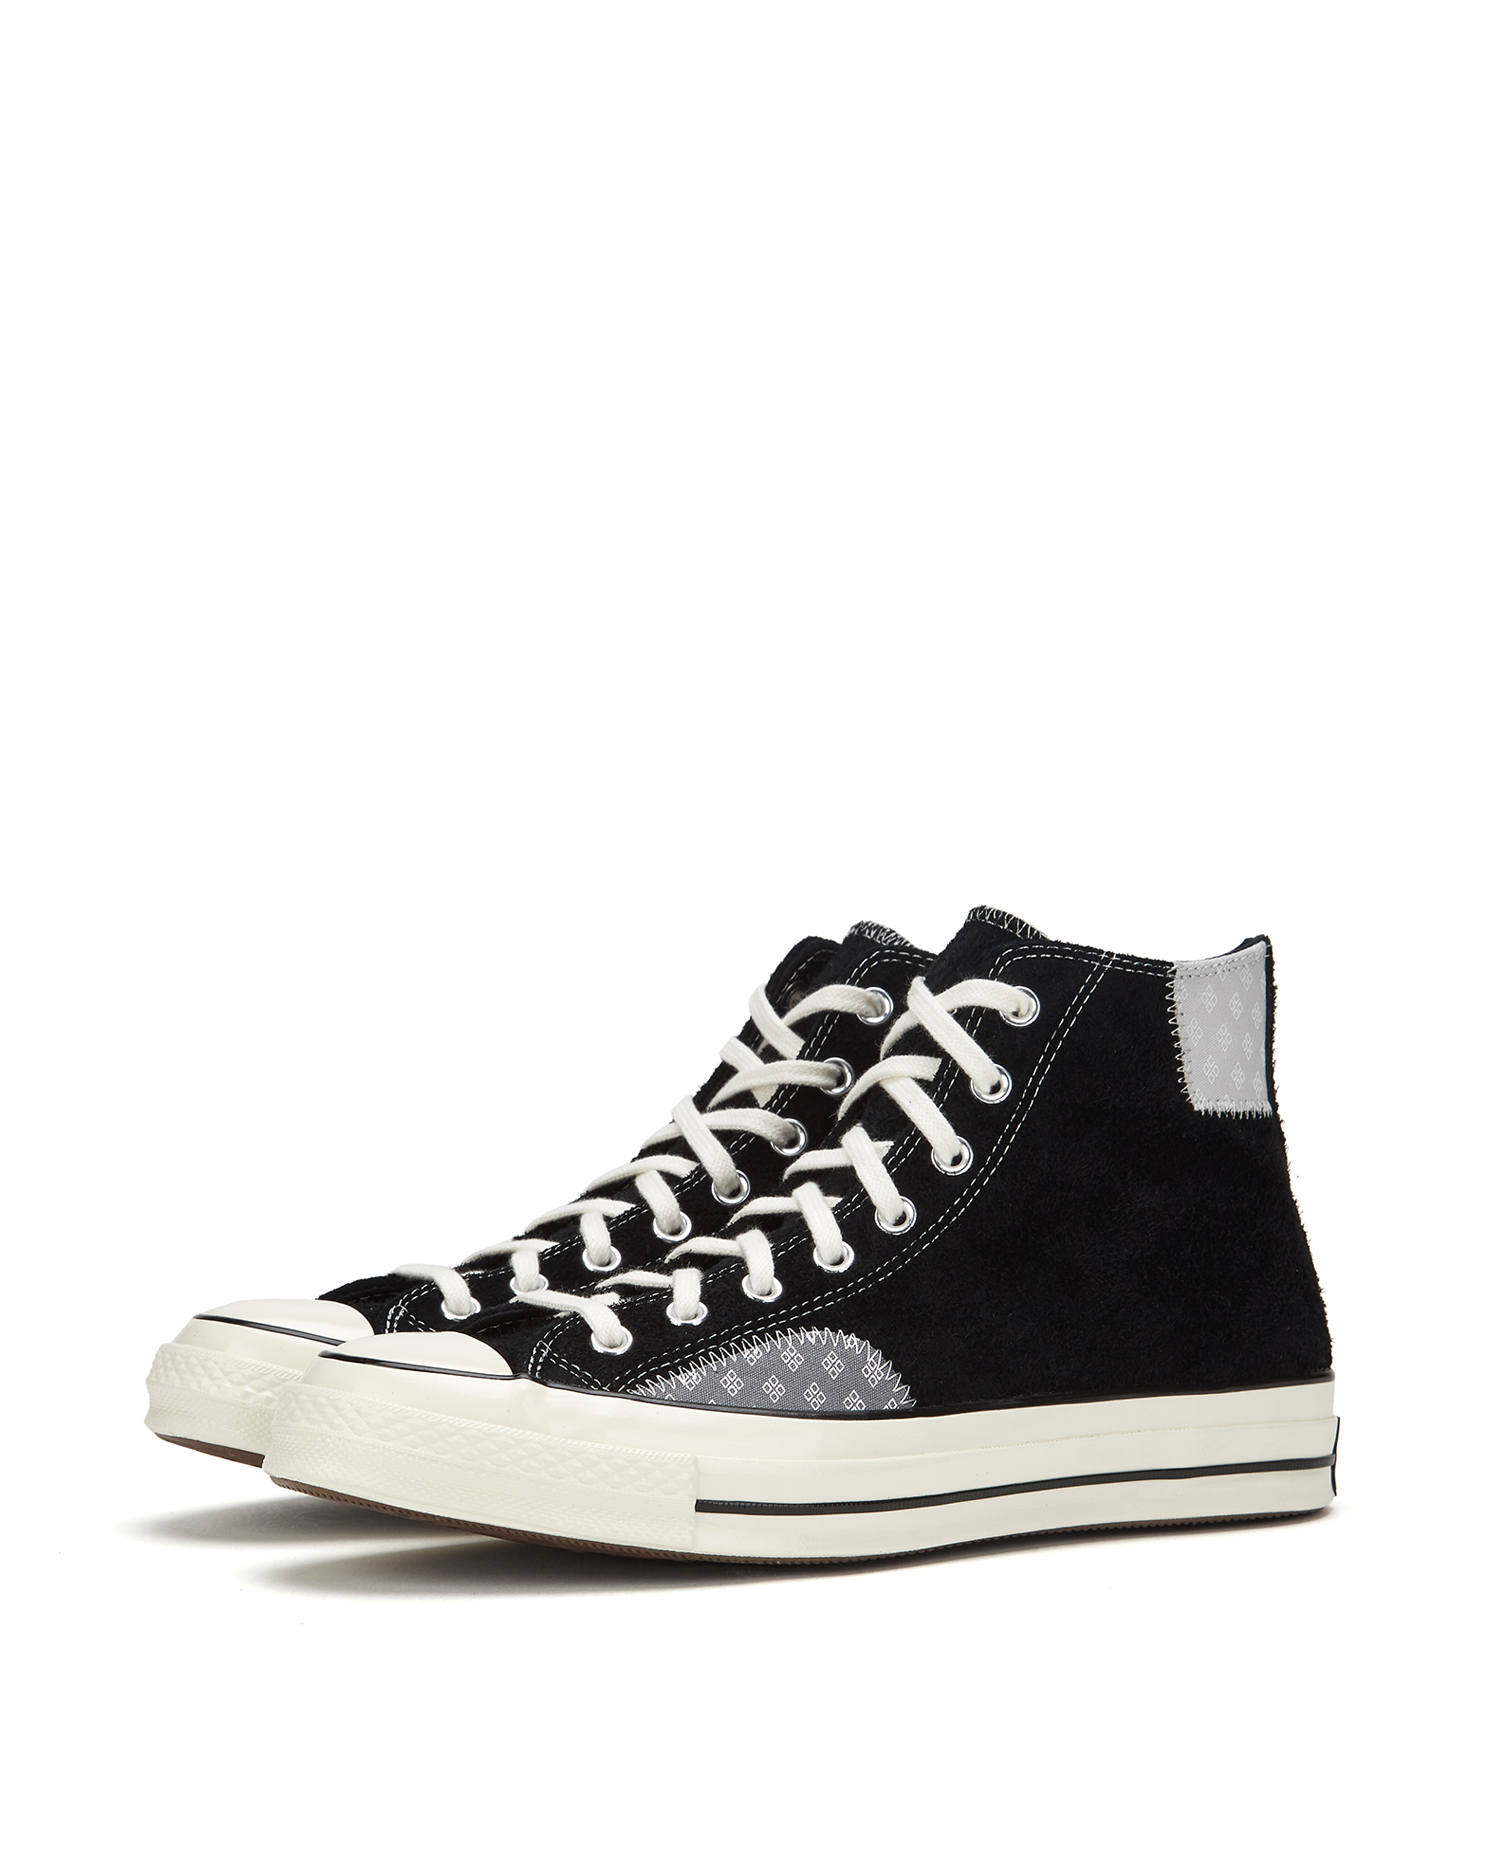 CONVERSE Chuck Taylor All Star 70 sneakers